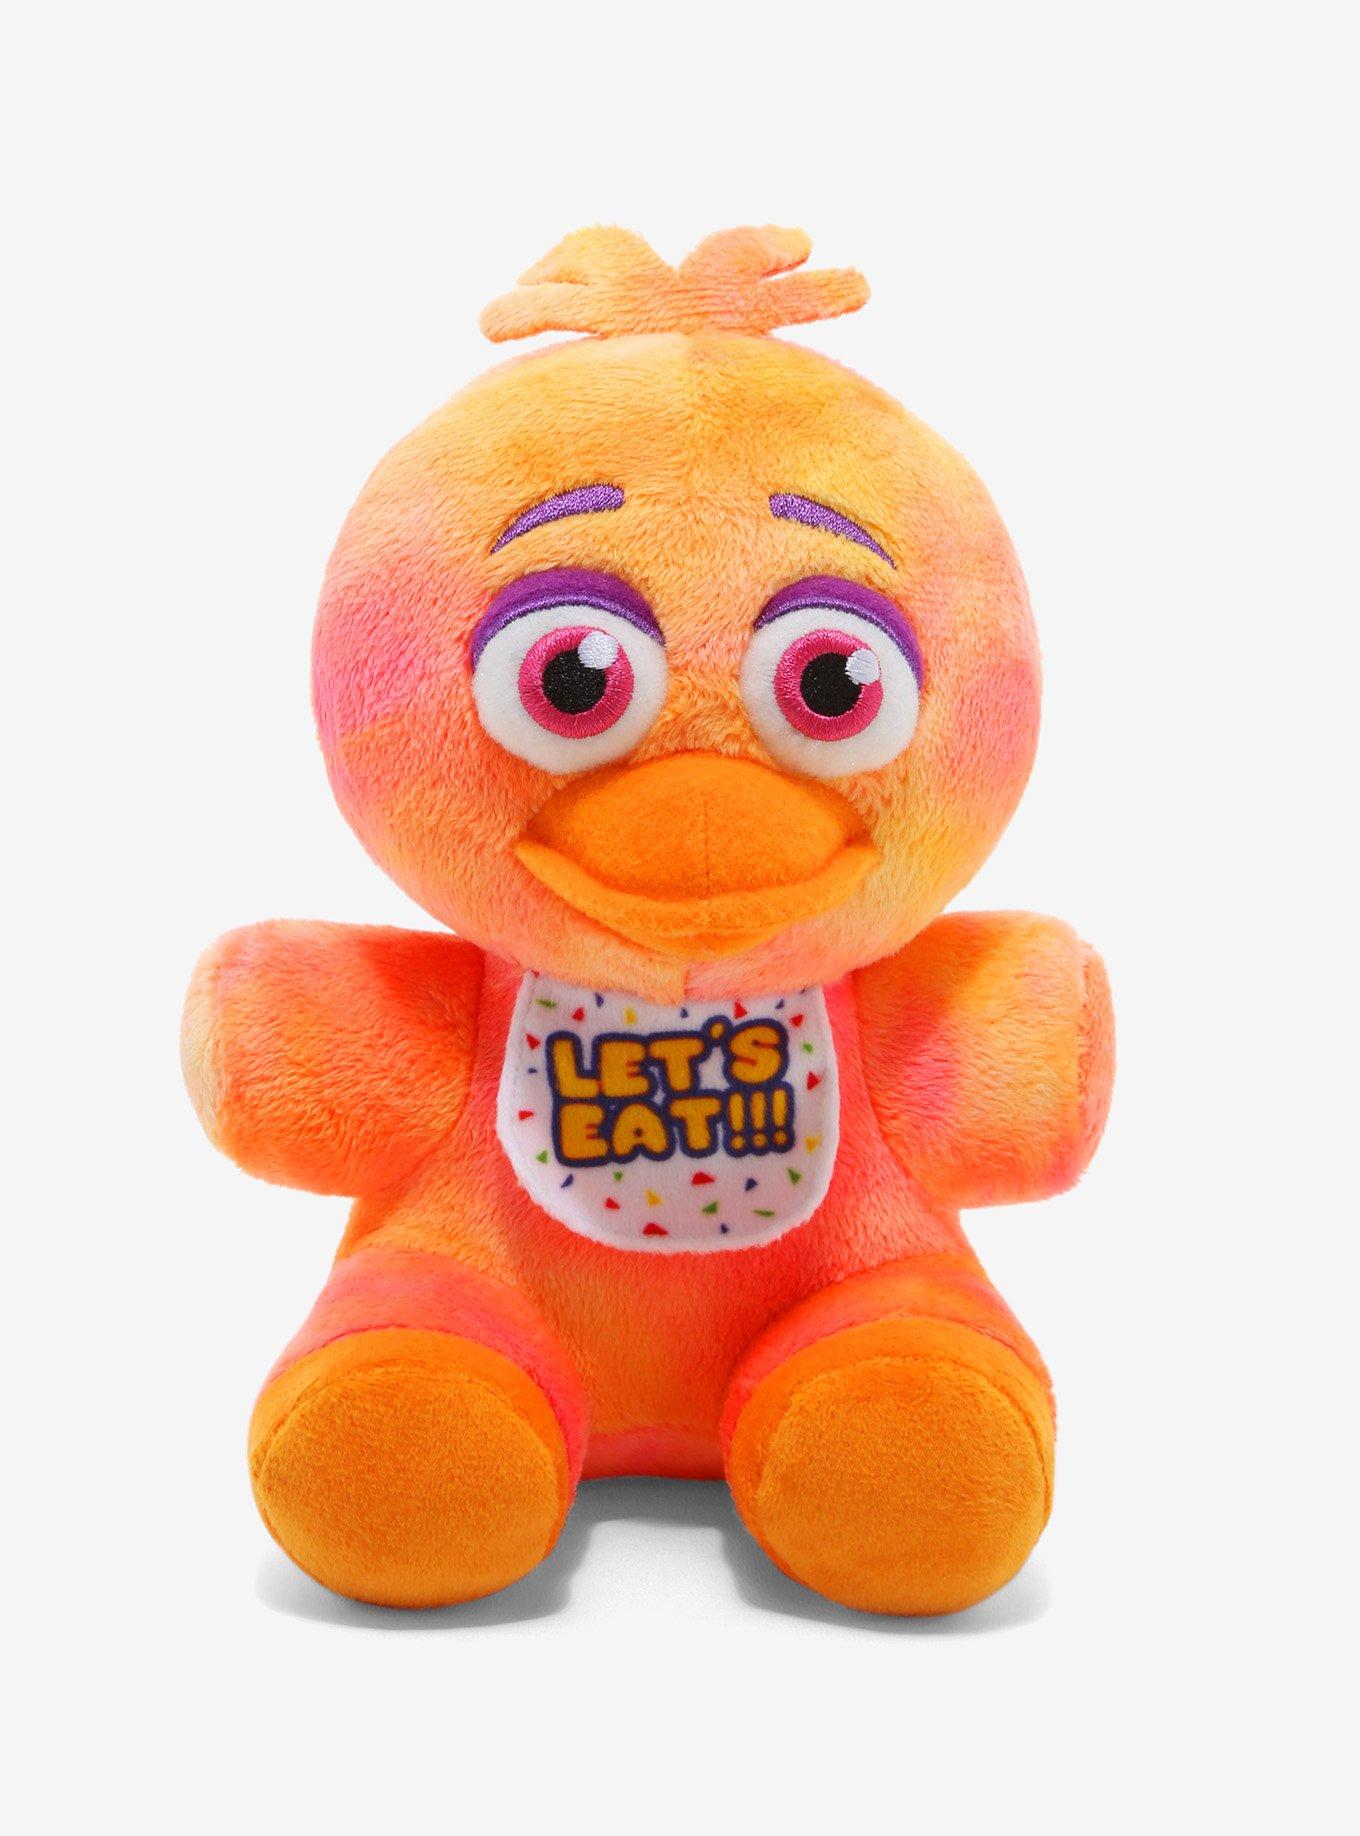 Plush Toy - Five Nights at Freddys - Chica - Funko - 6 - Series 1